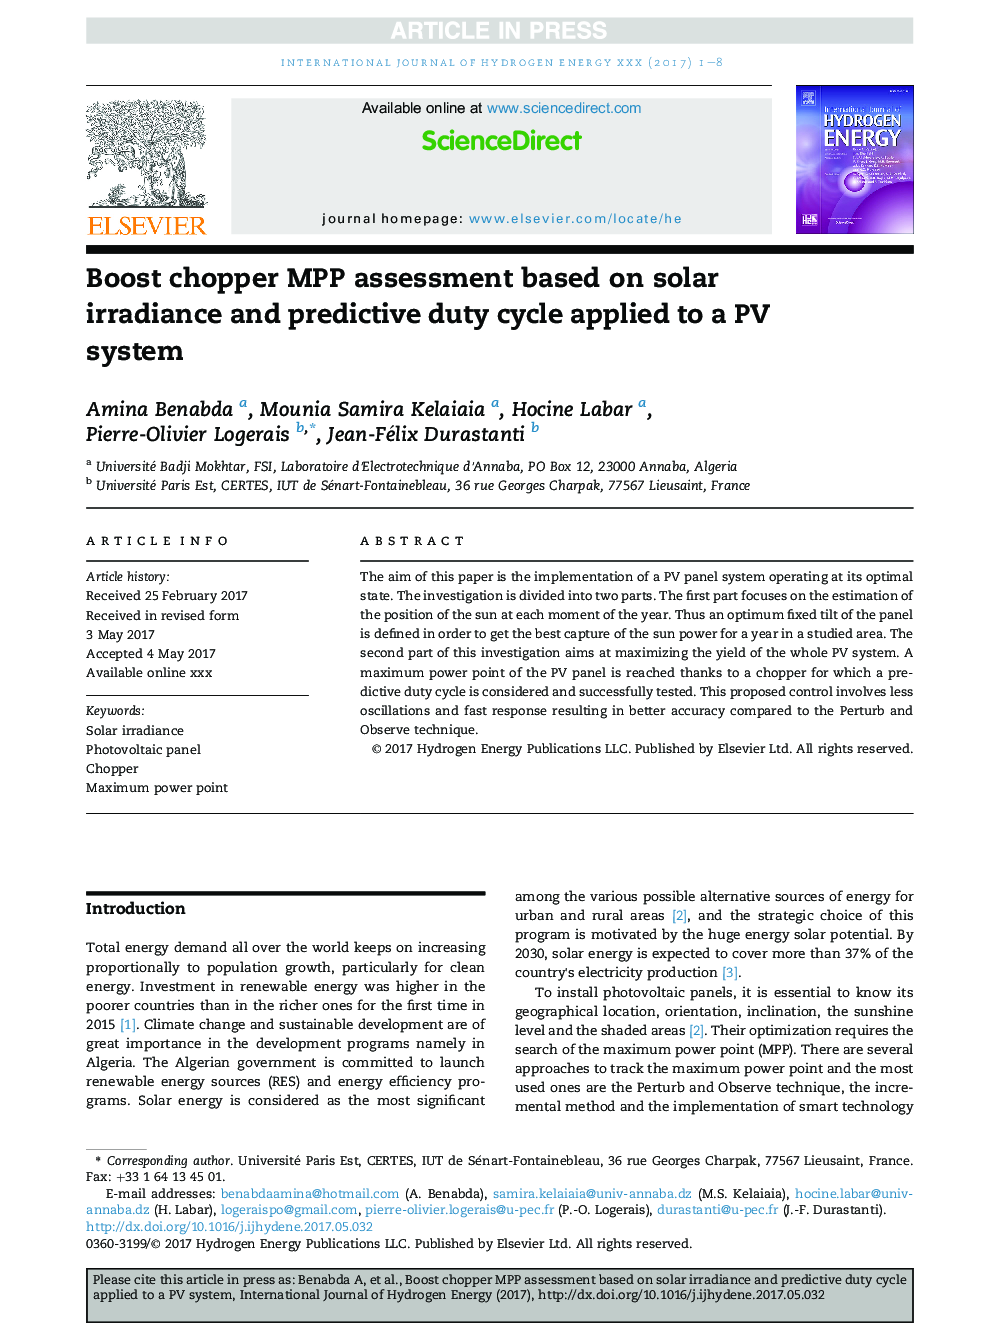 Boost chopper MPP assessment based on solar irradiance and predictive duty cycle applied to a PV system